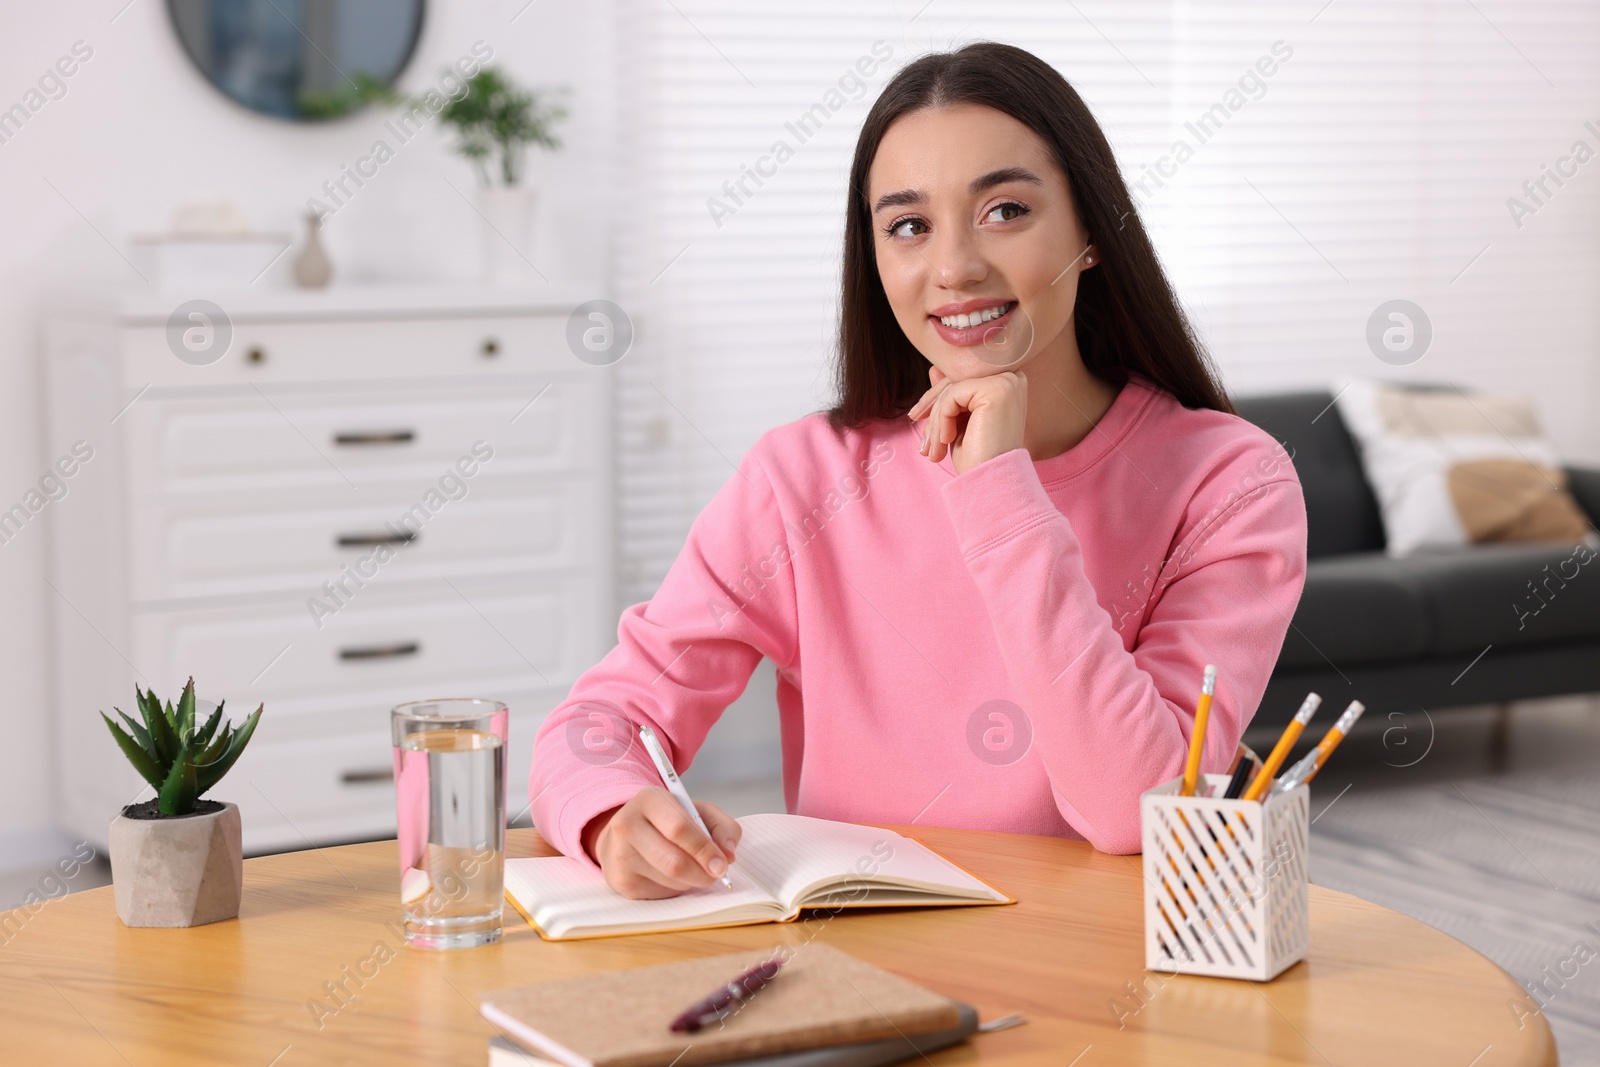 Photo of Young woman writing in notebook at wooden table indoors